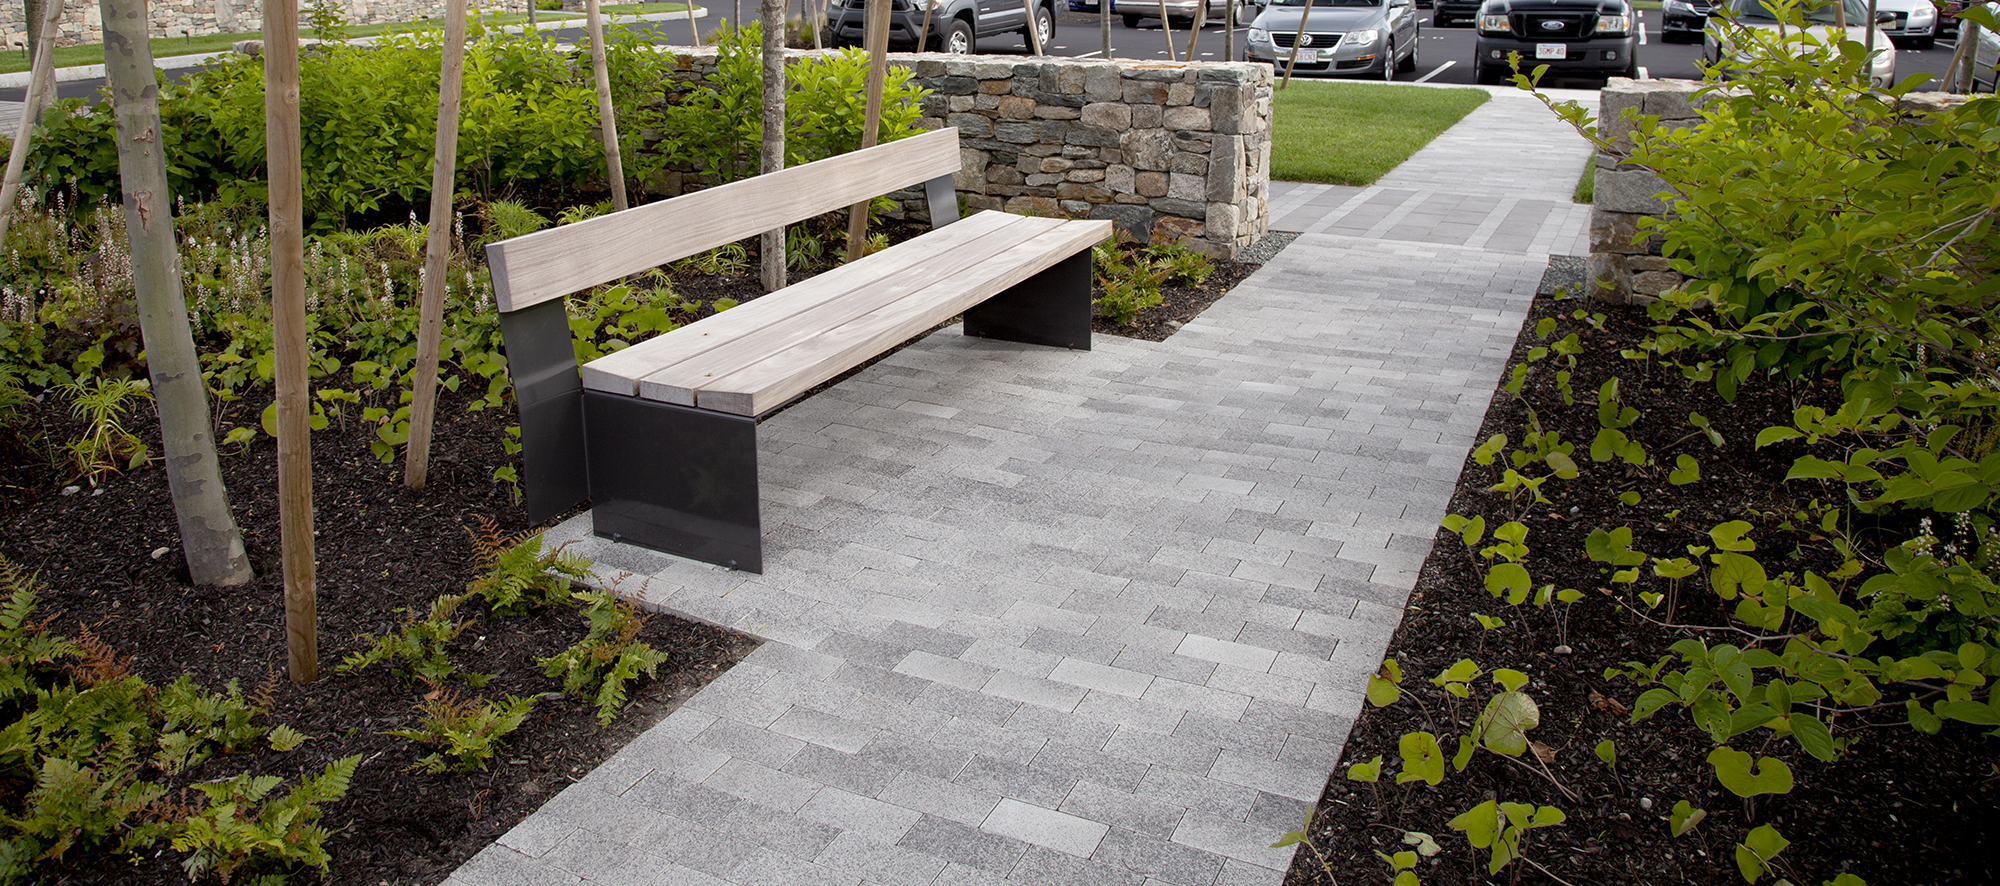 A park bench is surrounded by simple shrubs, trees, a retaining wall, and a white-grey Umbriano paver walkway toward the parking lot.